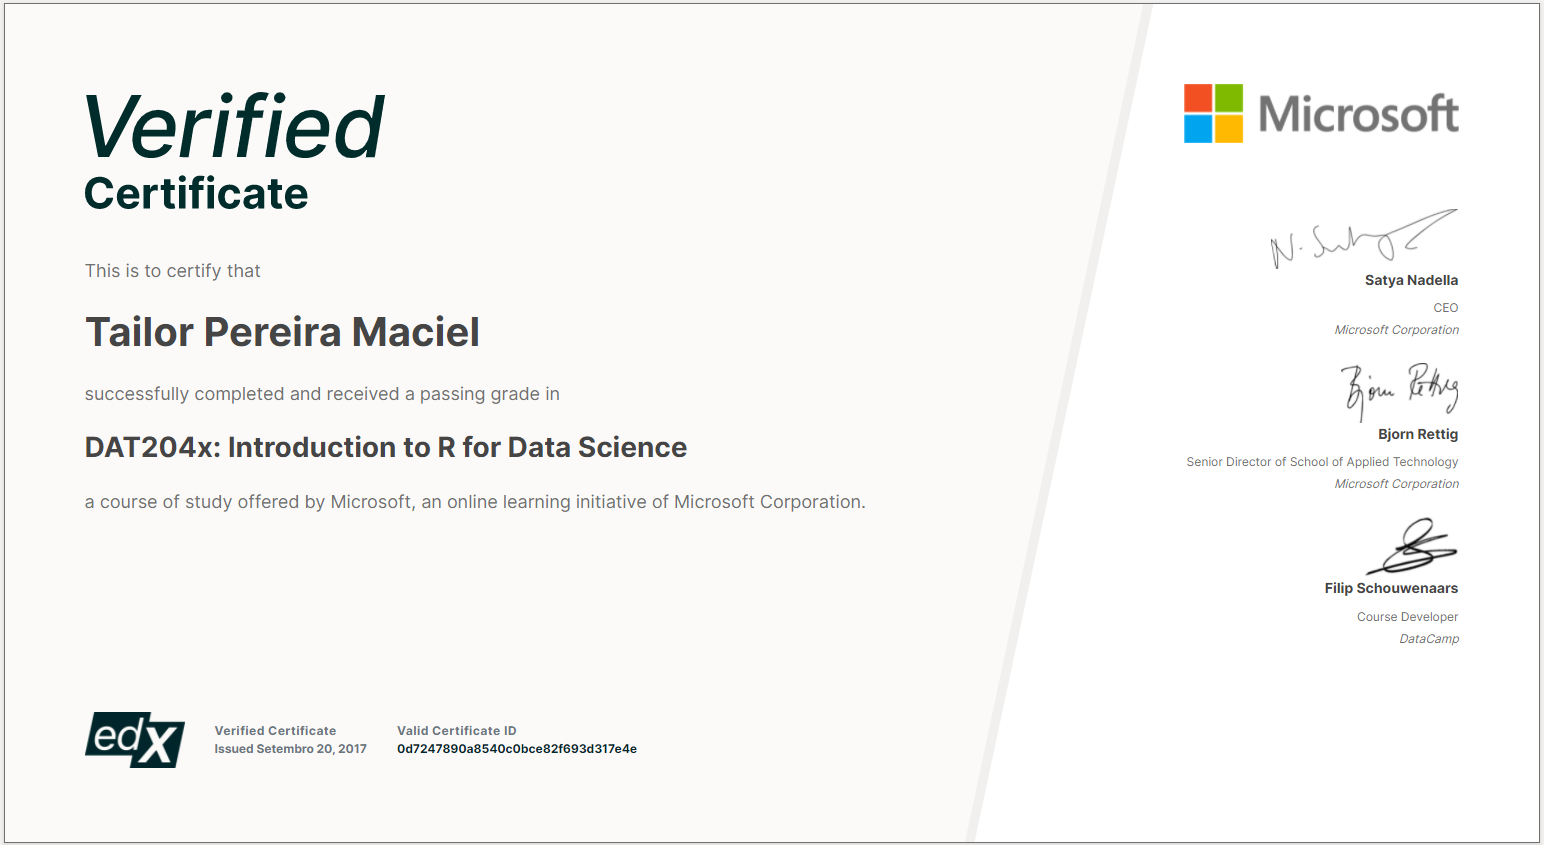 Introduction to R for Data Science